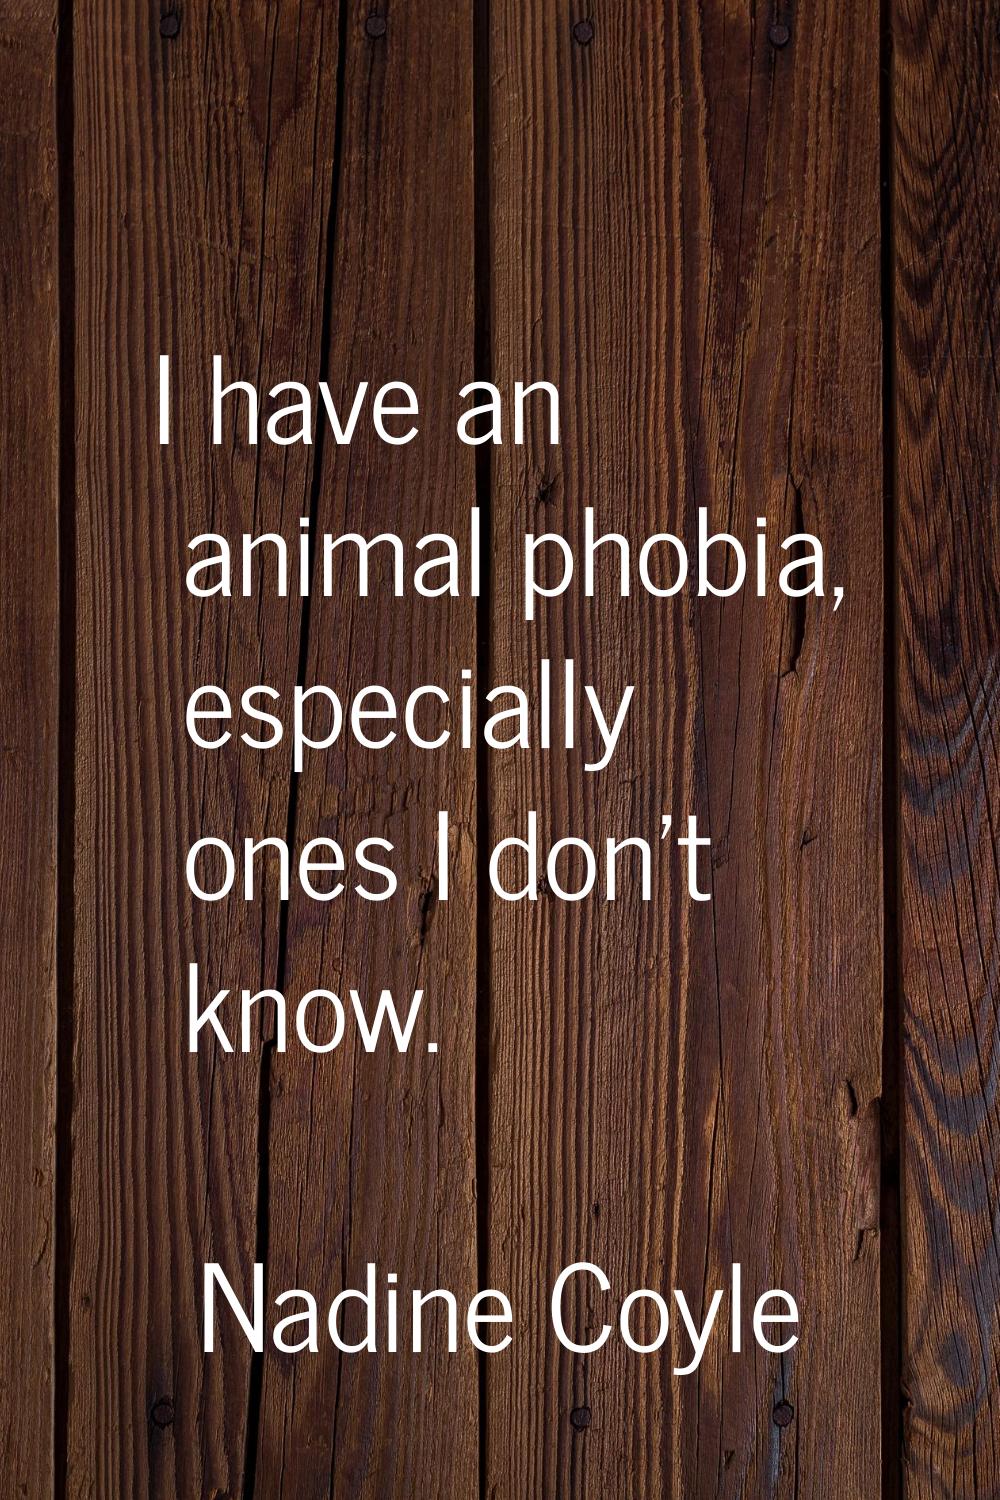 I have an animal phobia, especially ones I don't know.